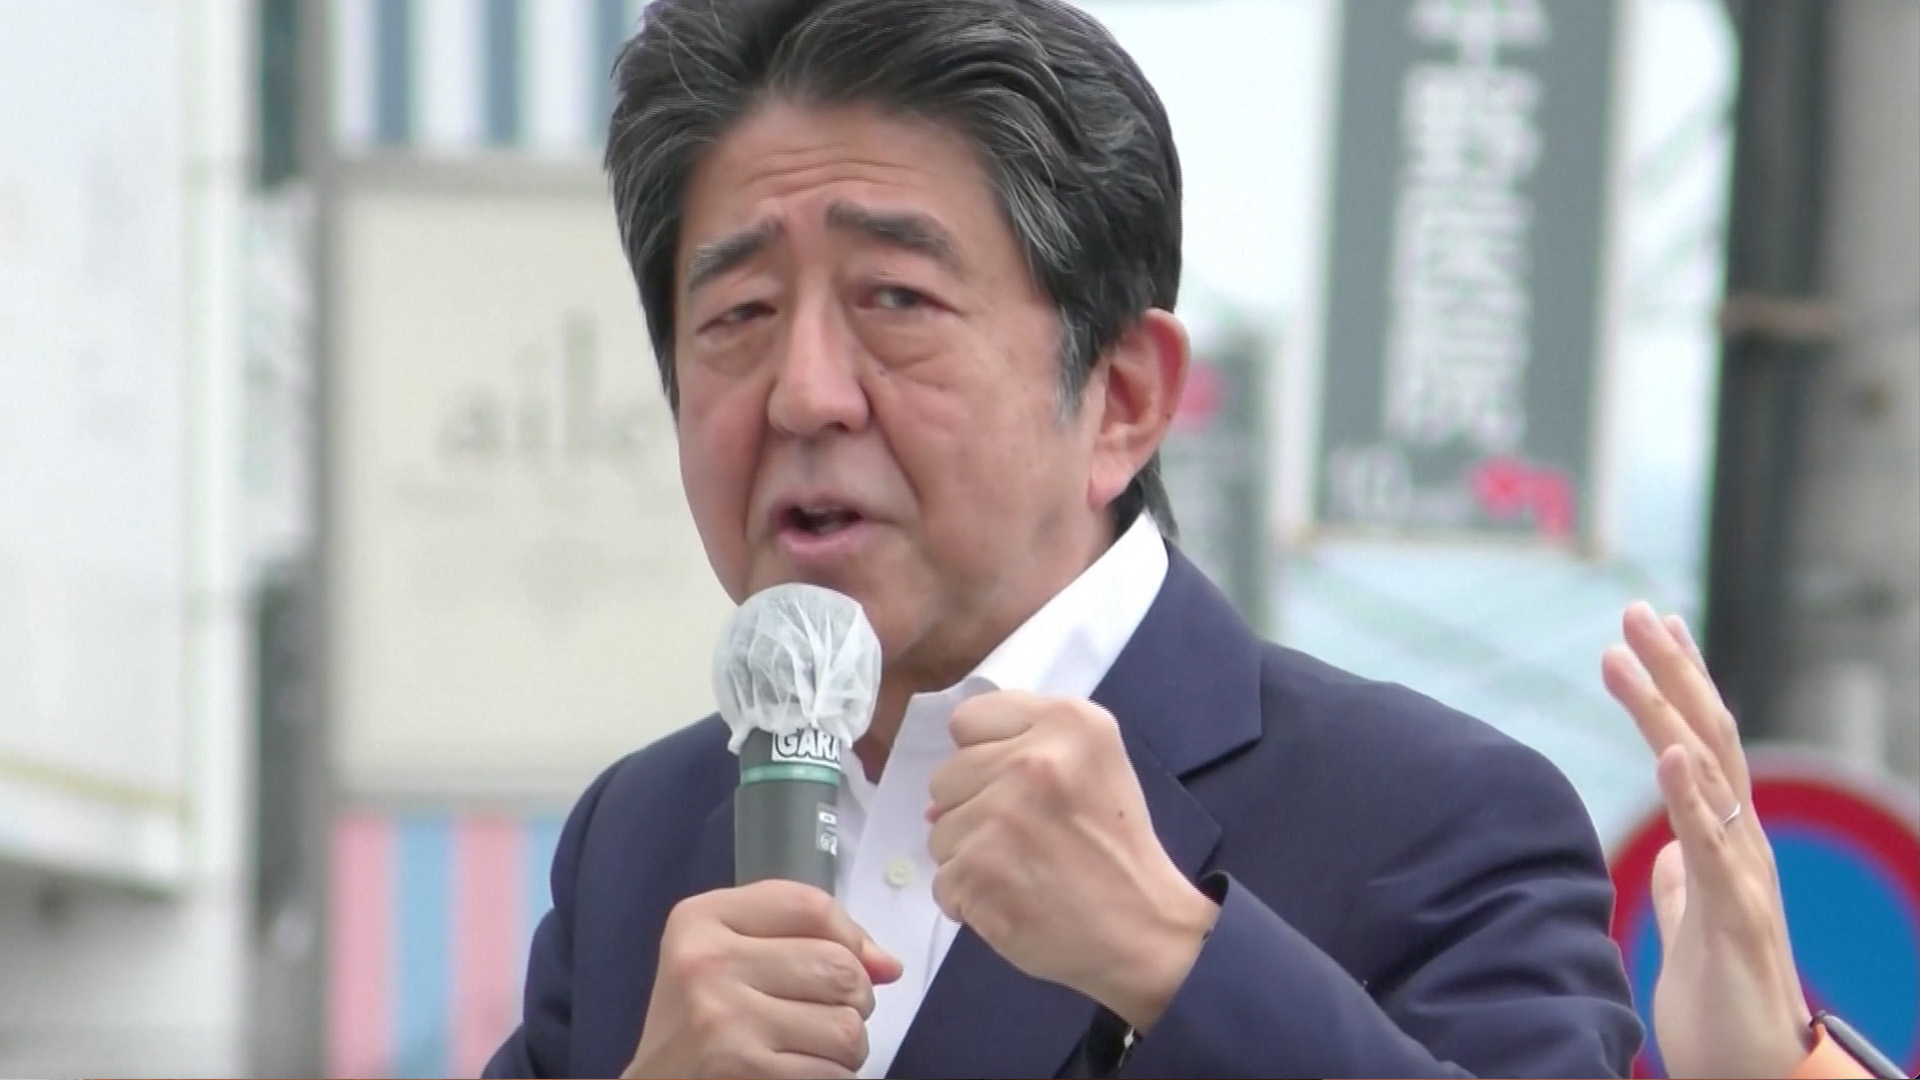 Live updates: Japan's ex-PM Shinzo Abe confirmed dead after shooting